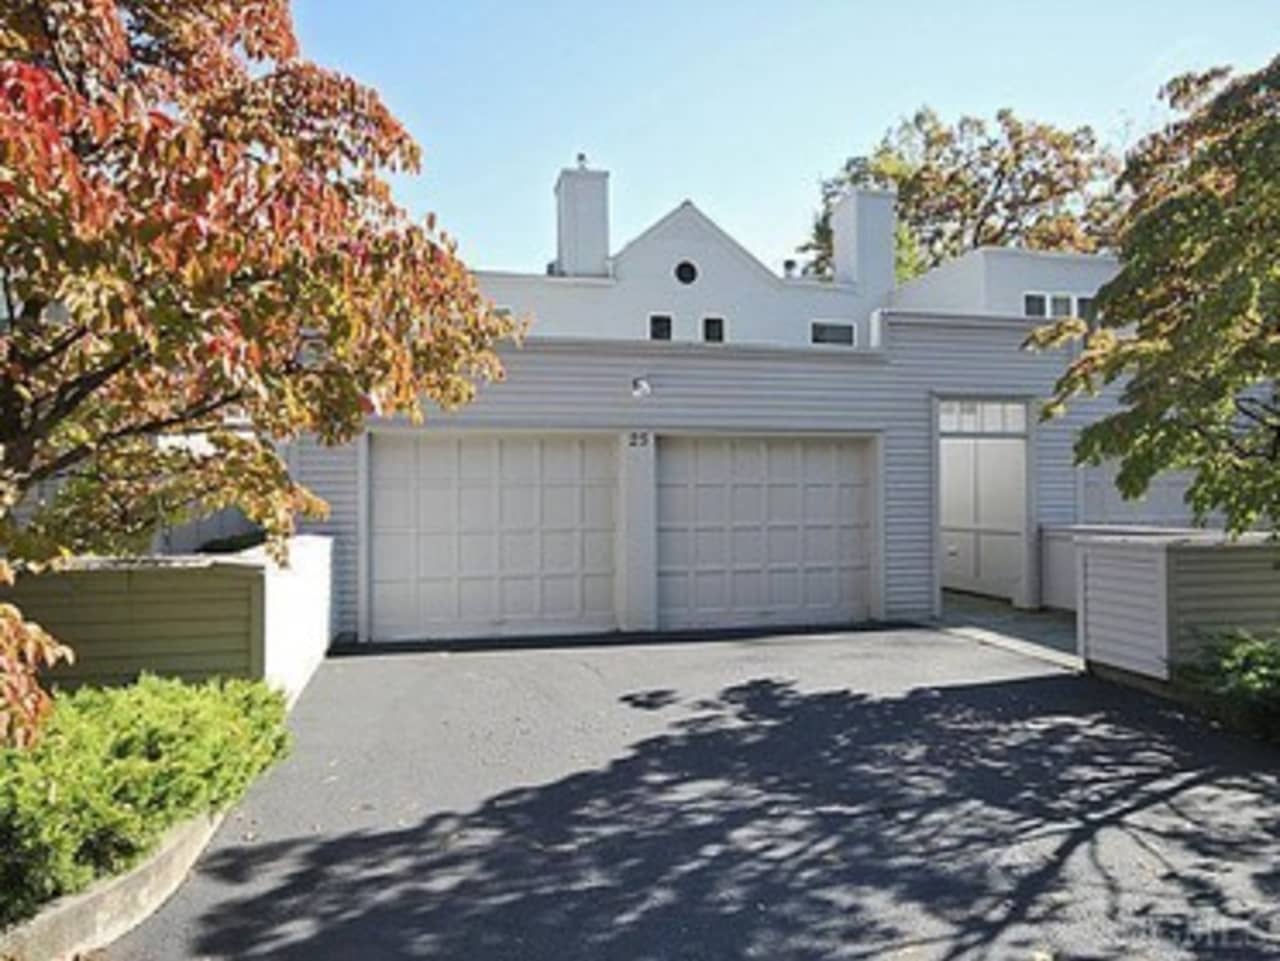 This house at 25 Beechwood Way in Briarcliff is open for viewing this Sunday.